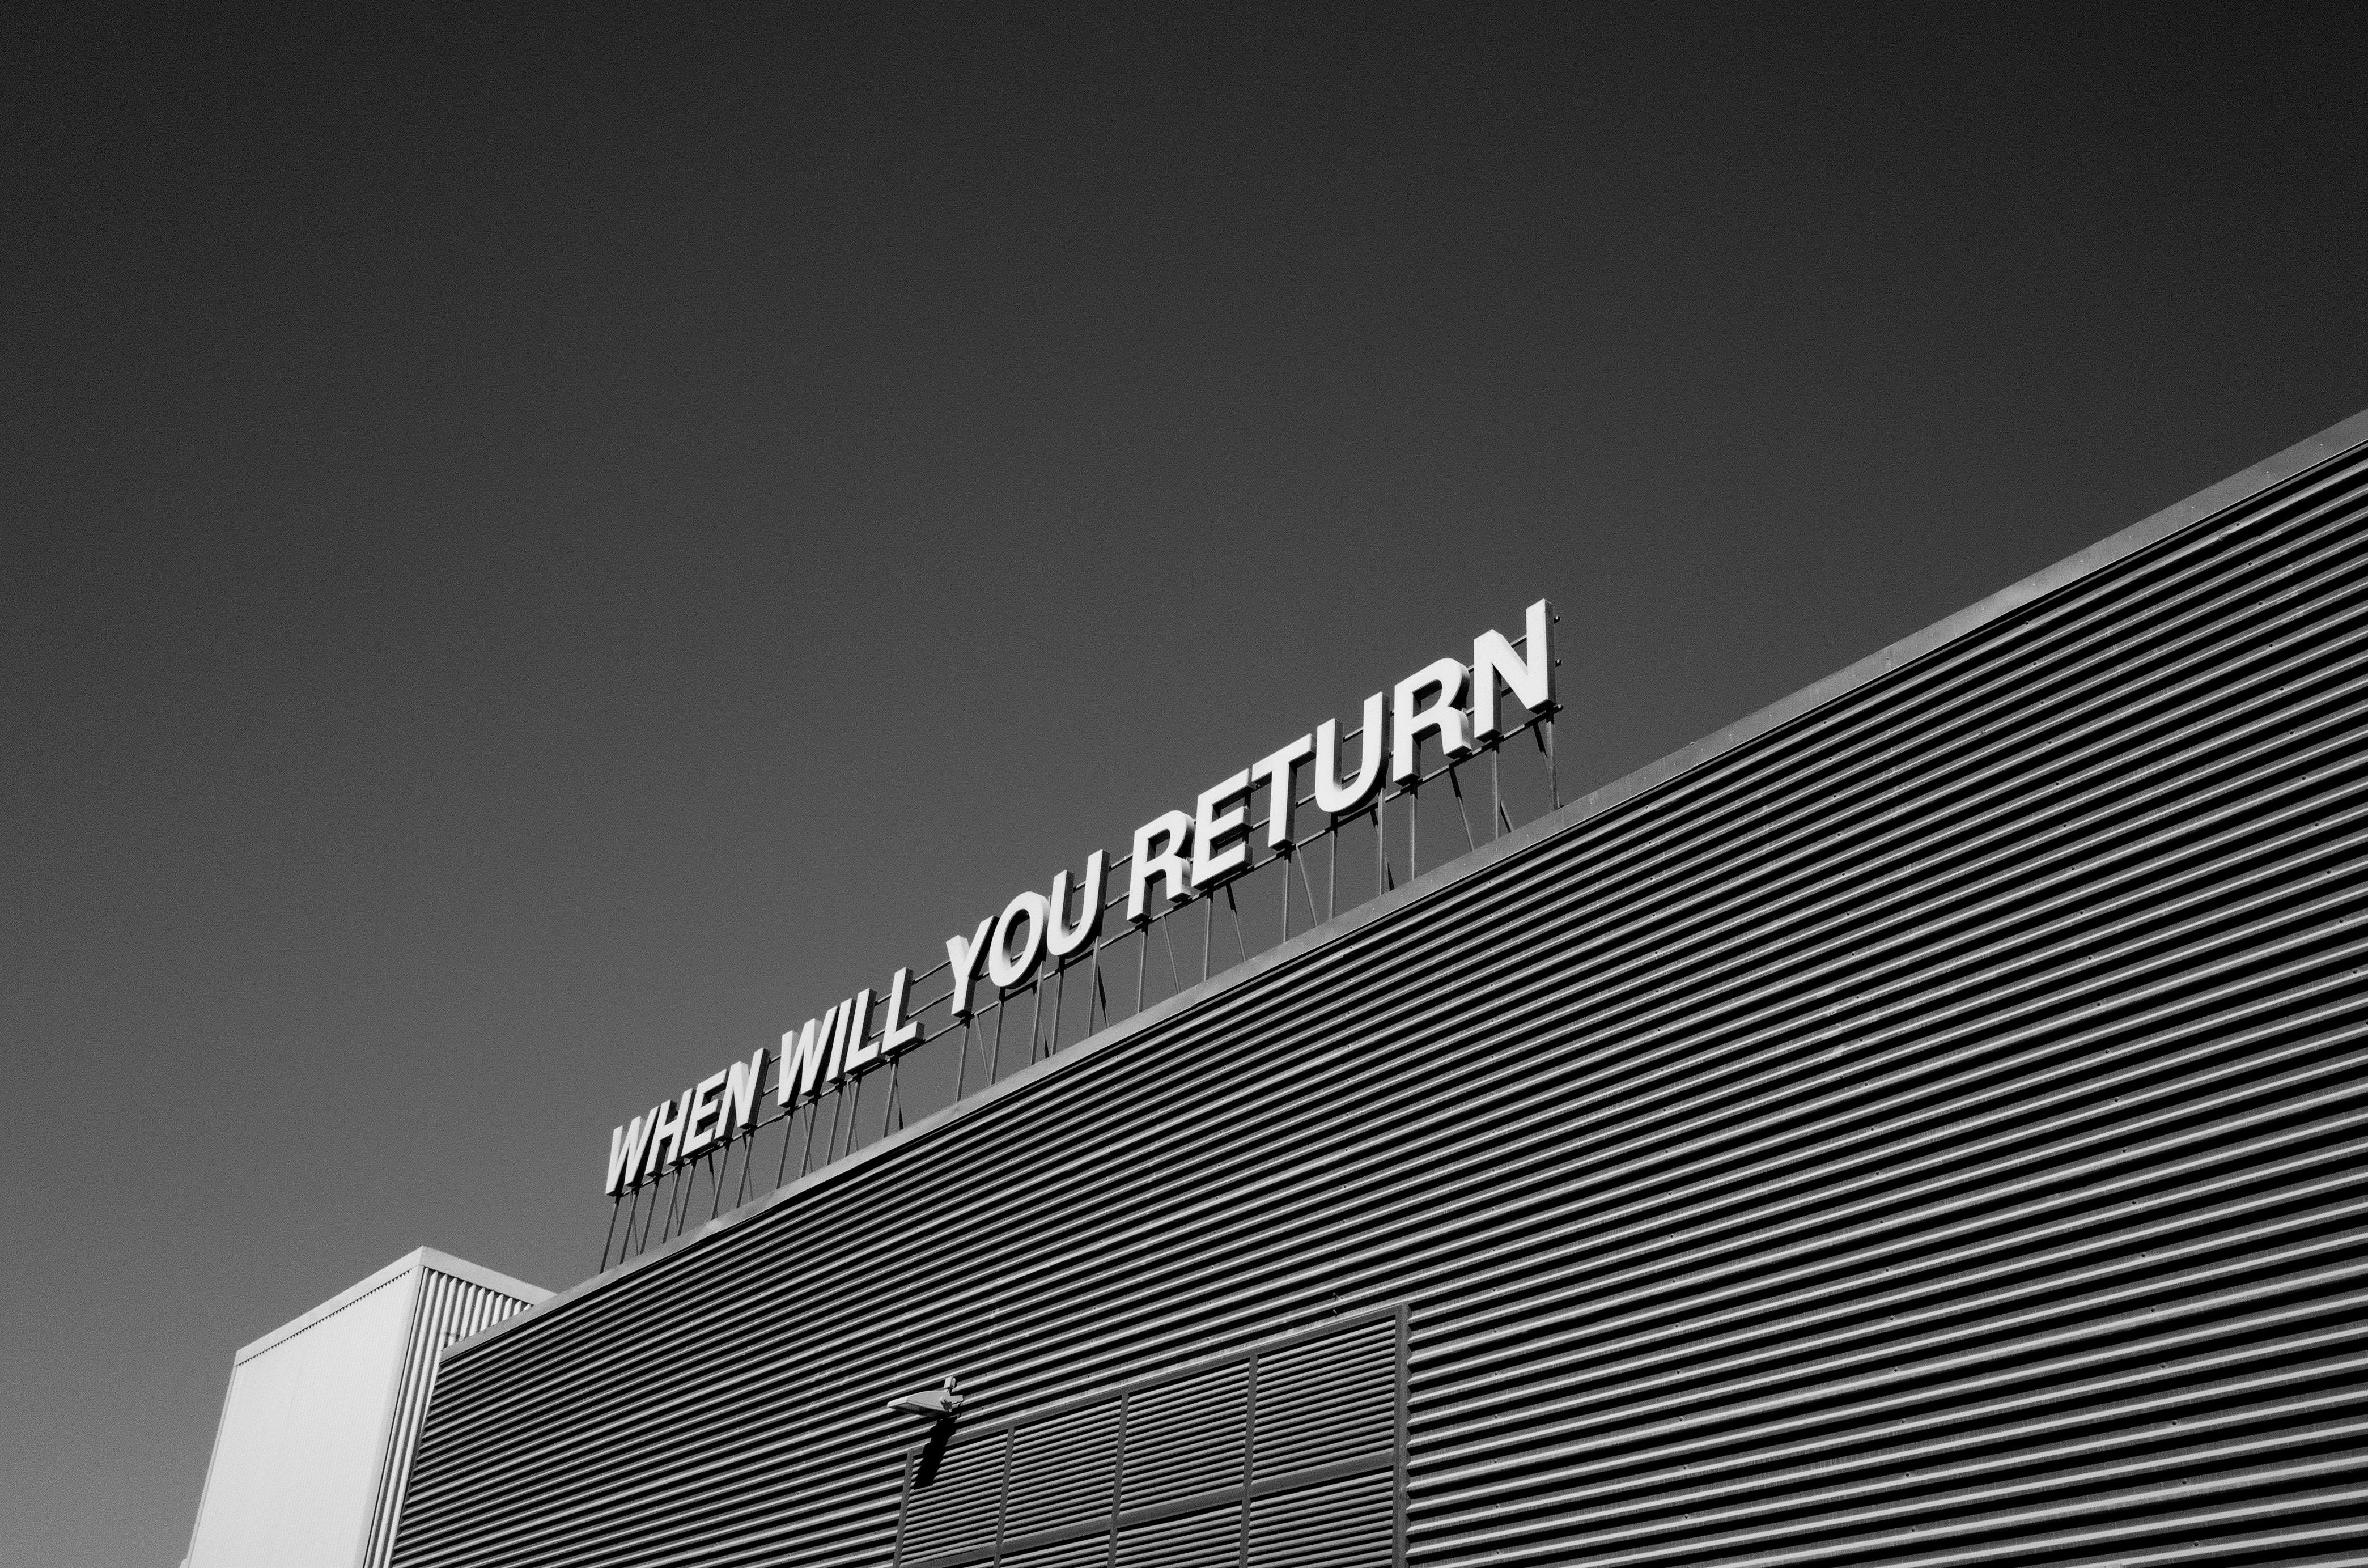 When Will You Return Signage 1749057